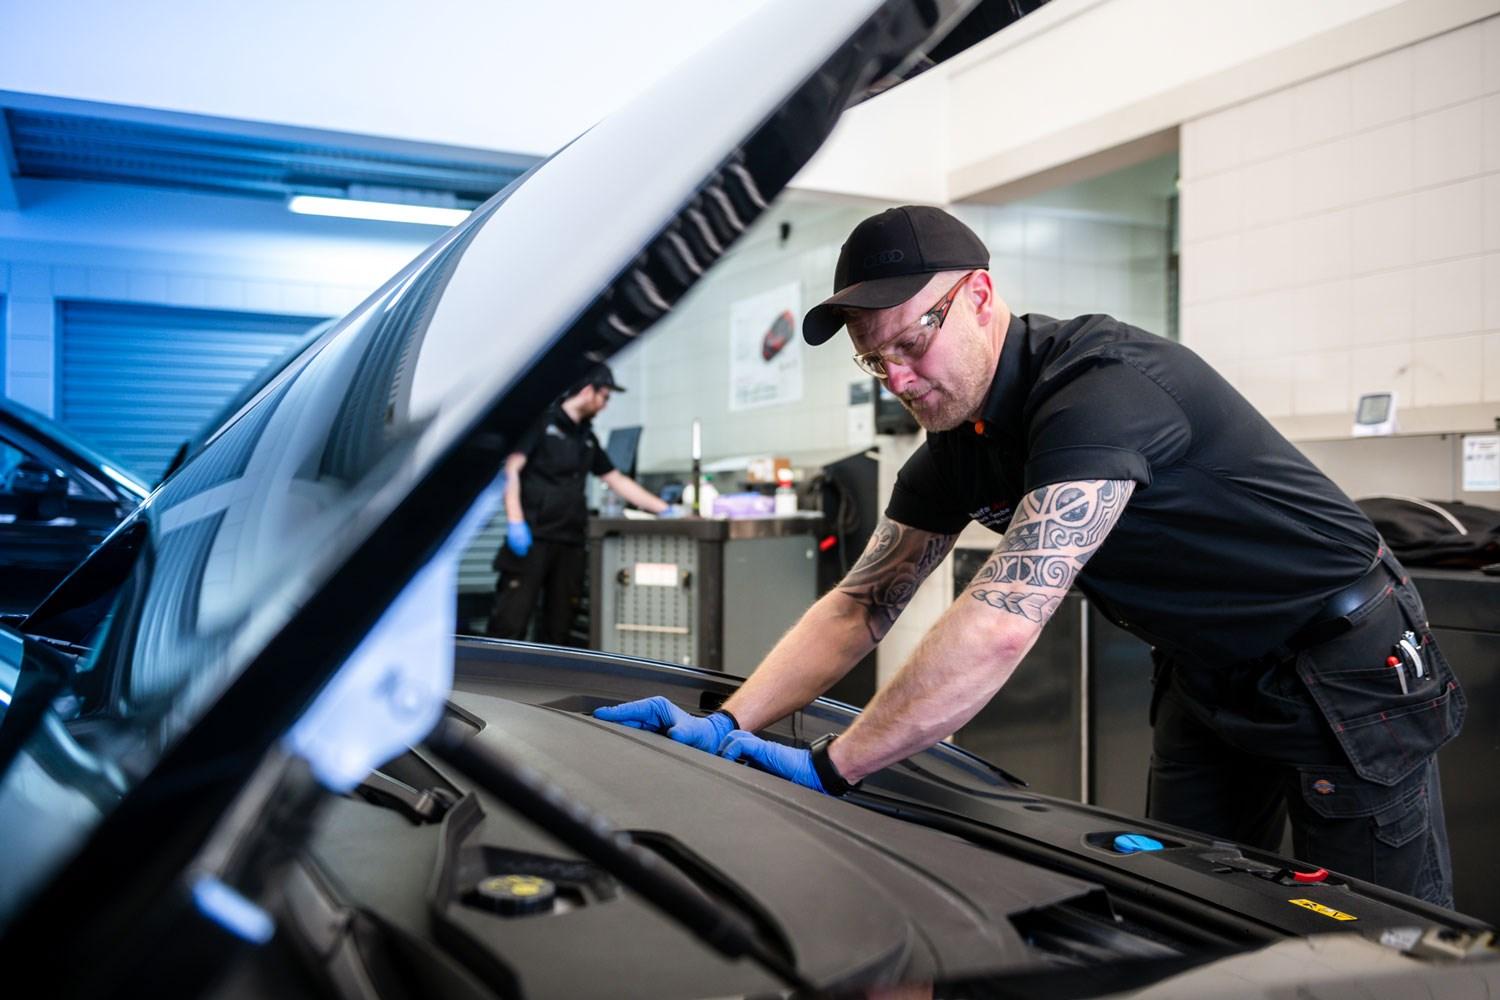 Audi Repair Specialist inspects under the hood of car during routine maintenance at the Audi Repair Centre at Belfast Audi